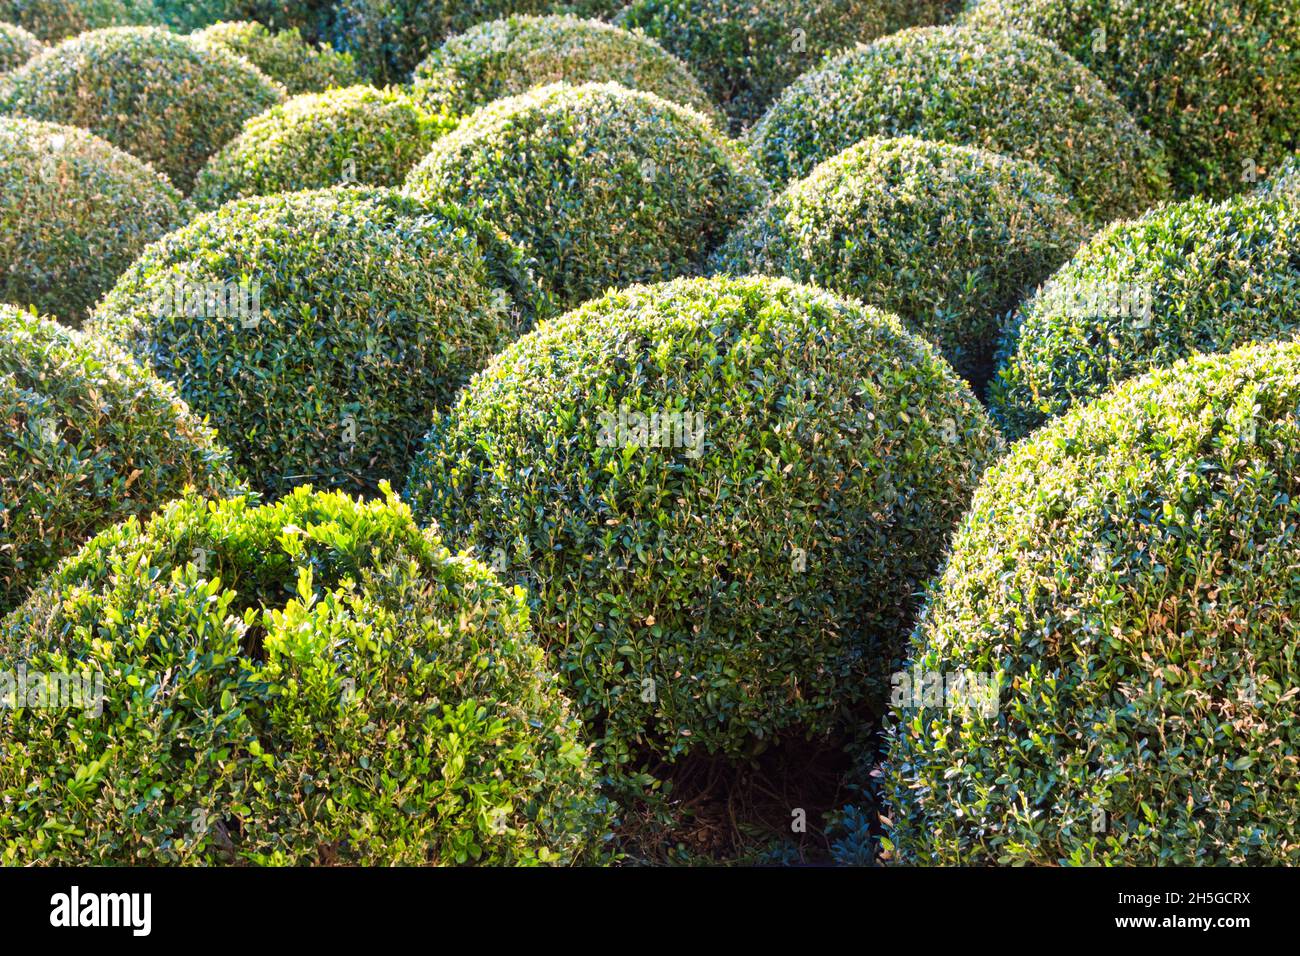 Clipped box plant spheres Buxus sempervirens shrubs Stock Photo